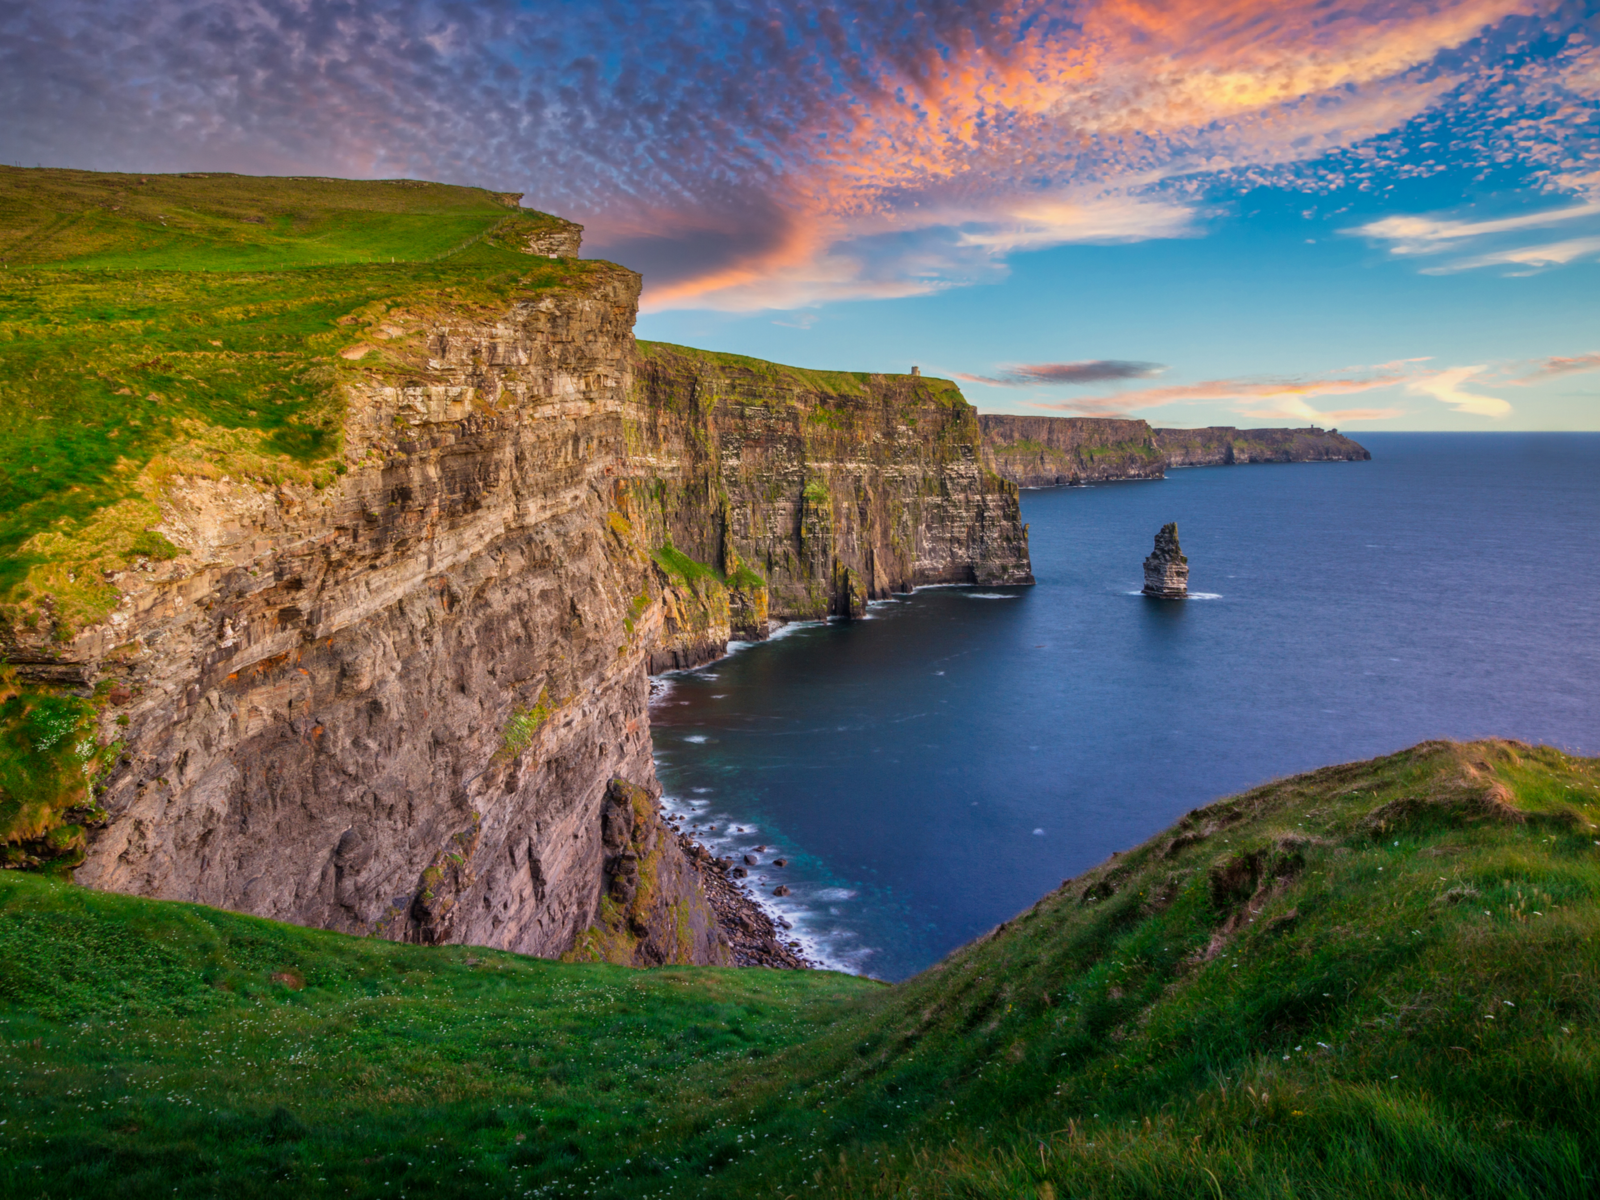 A scenic sunset over the towering Cliffs of Moher, one of the best places to visit in Ireland, layer of green pasture at the top